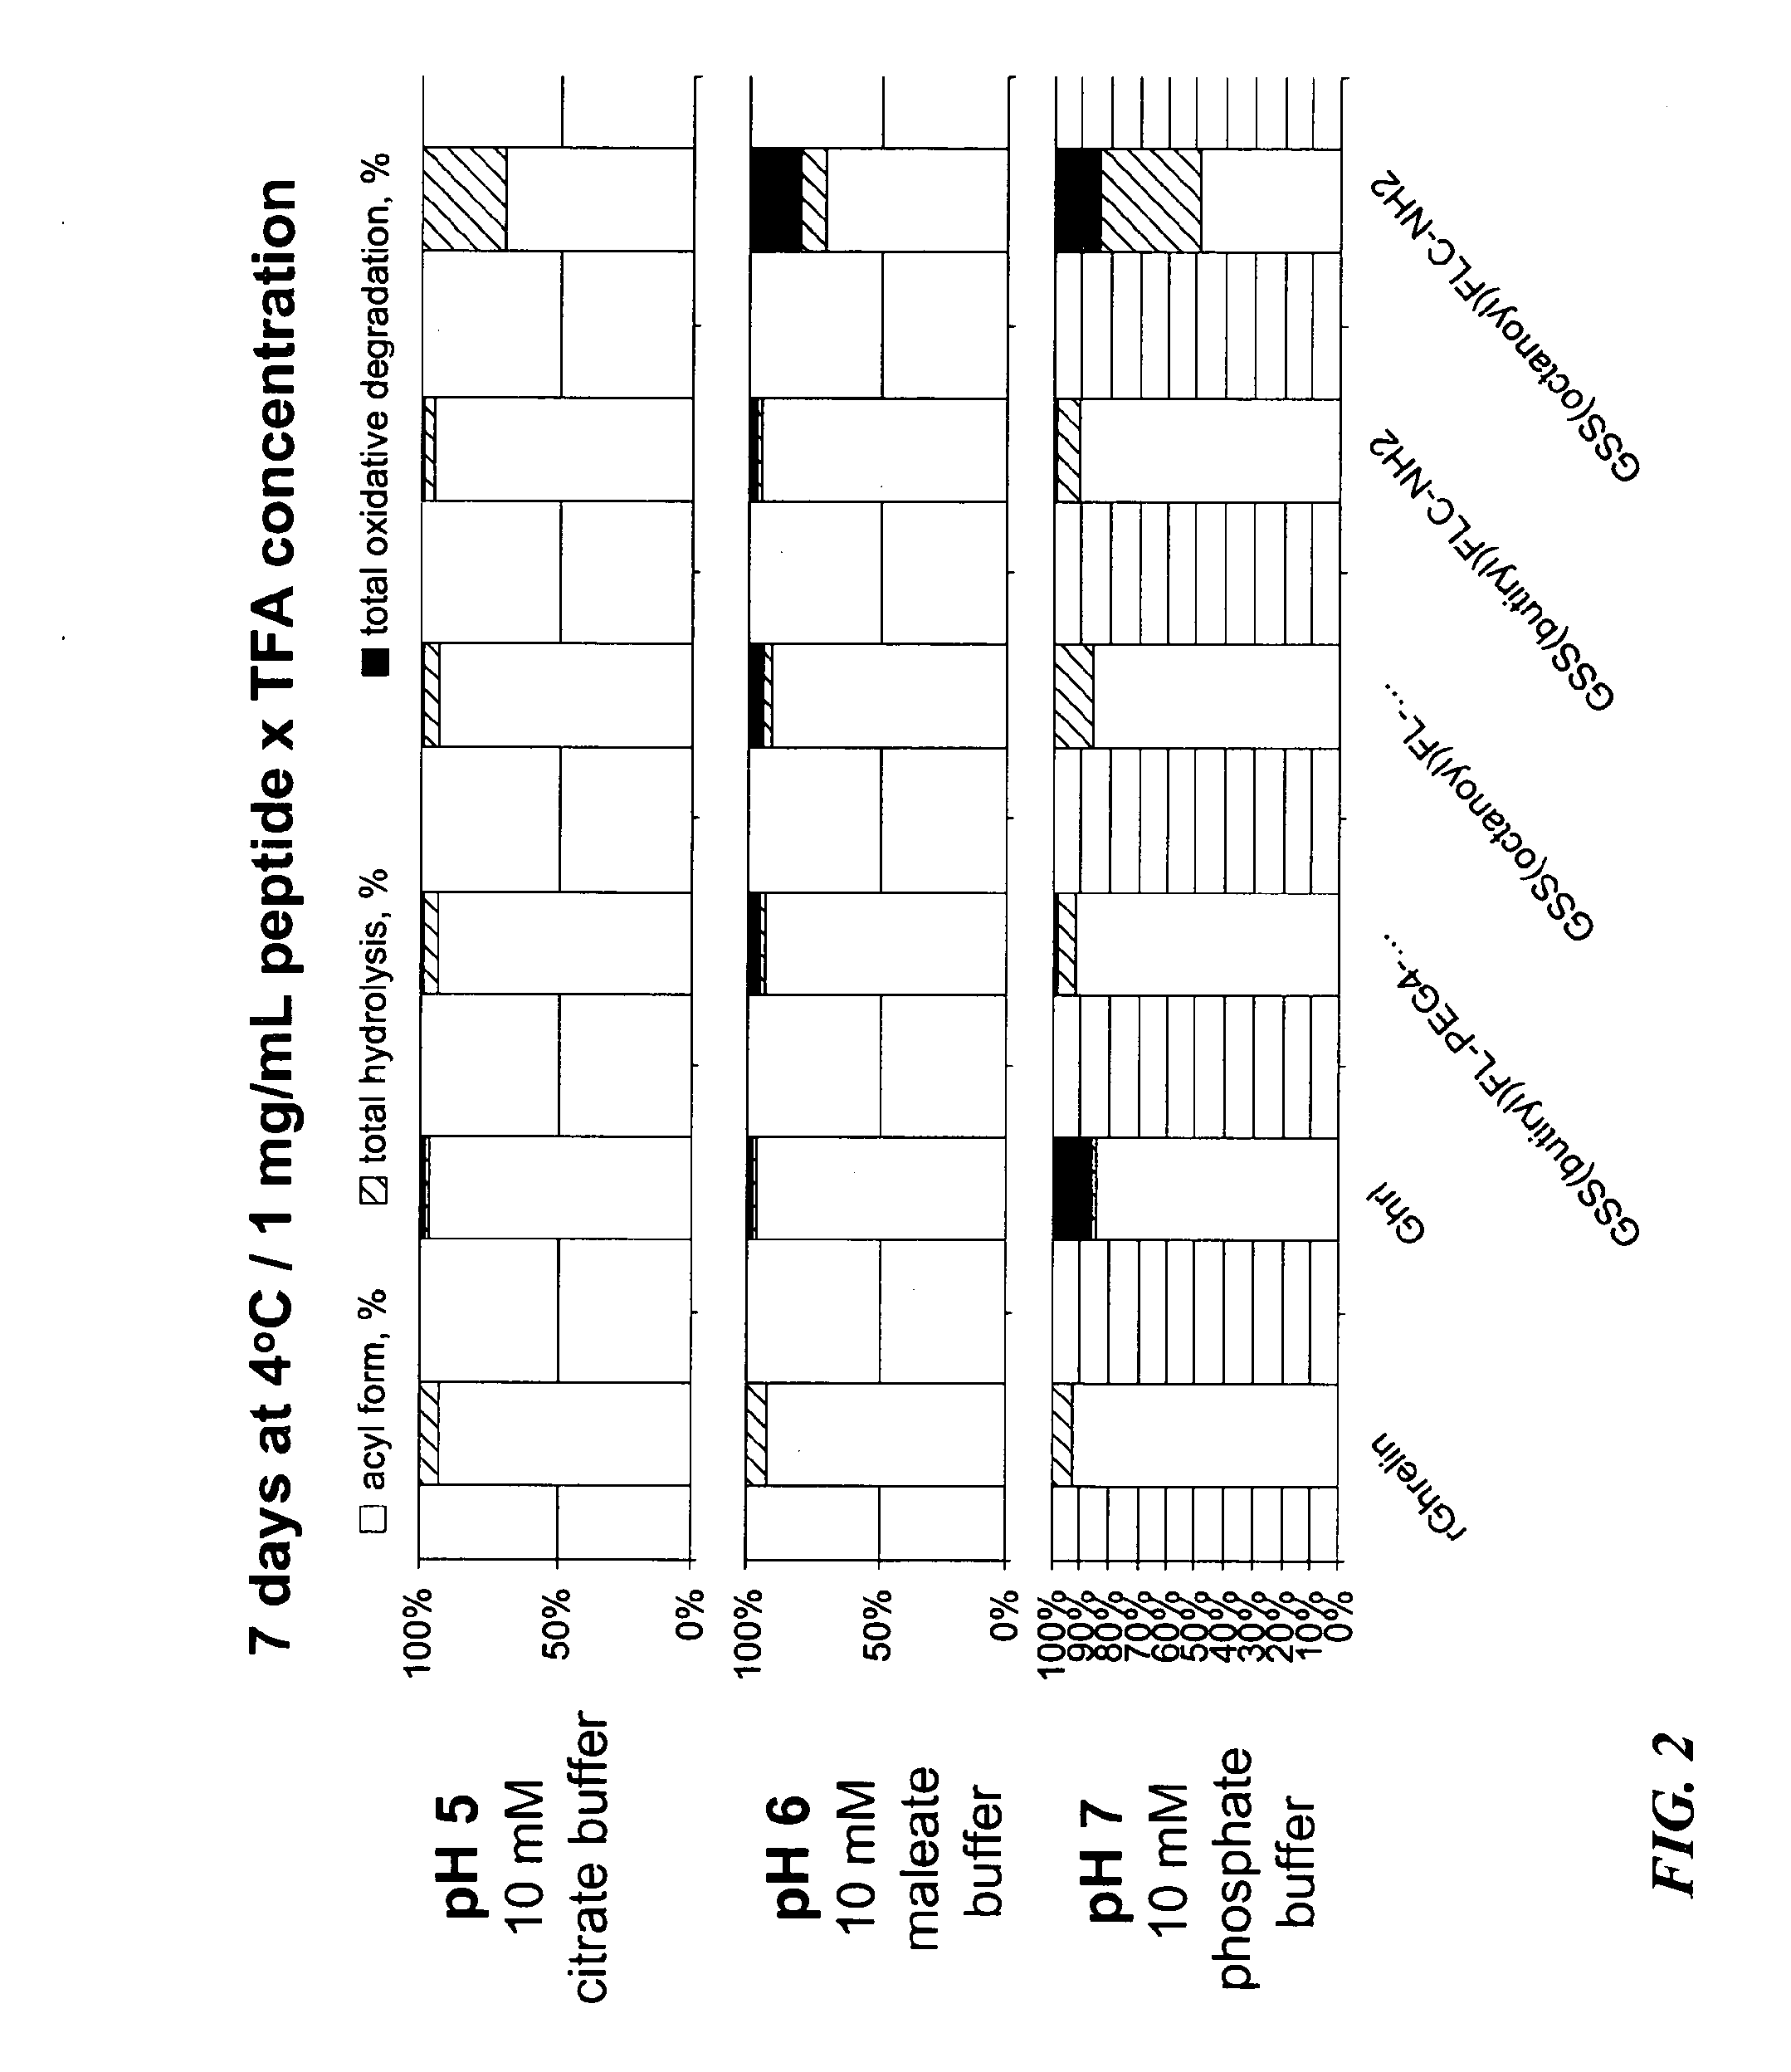 Ghrelin Mimetic Polypeptide Hapten Immunoconjugates Having Improved Solubility and Immunogenicity and Methods of Use Thereof